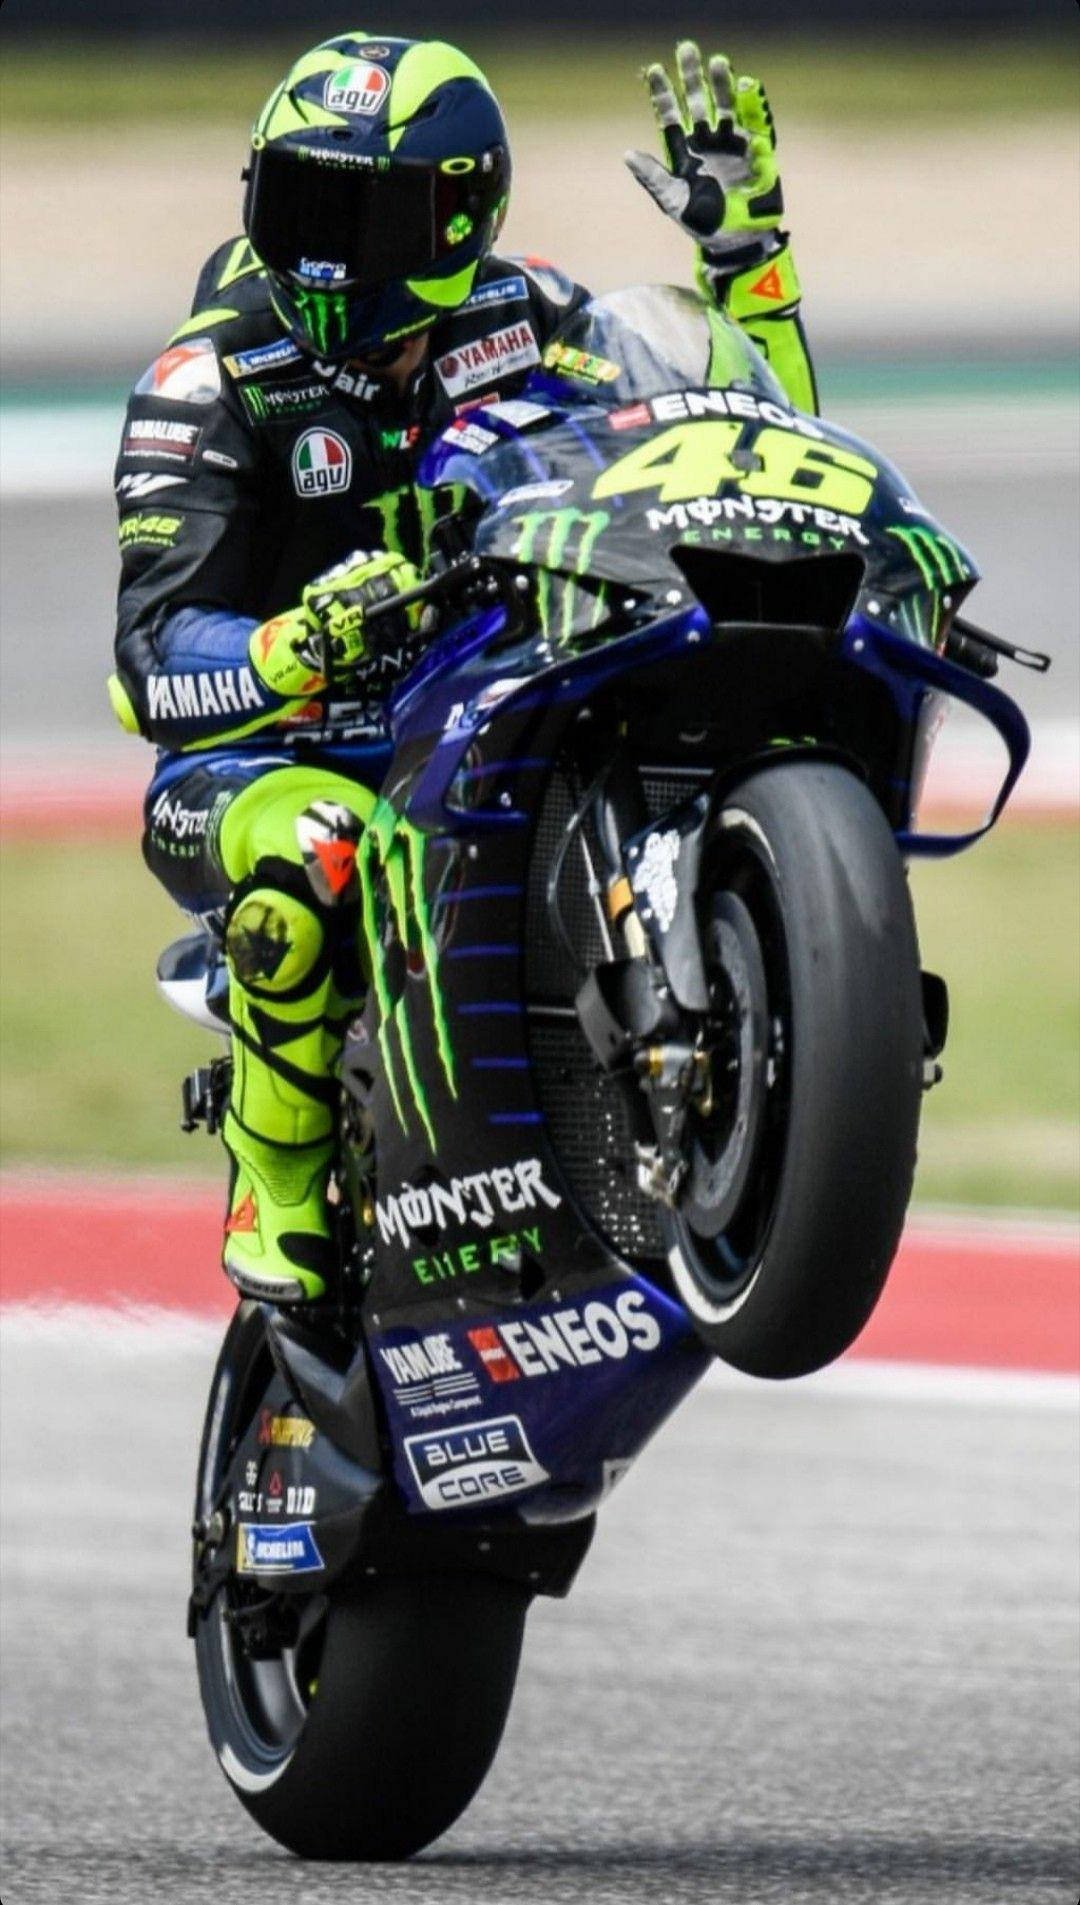 46 valentino rossi Wallpapers Download | MobCup